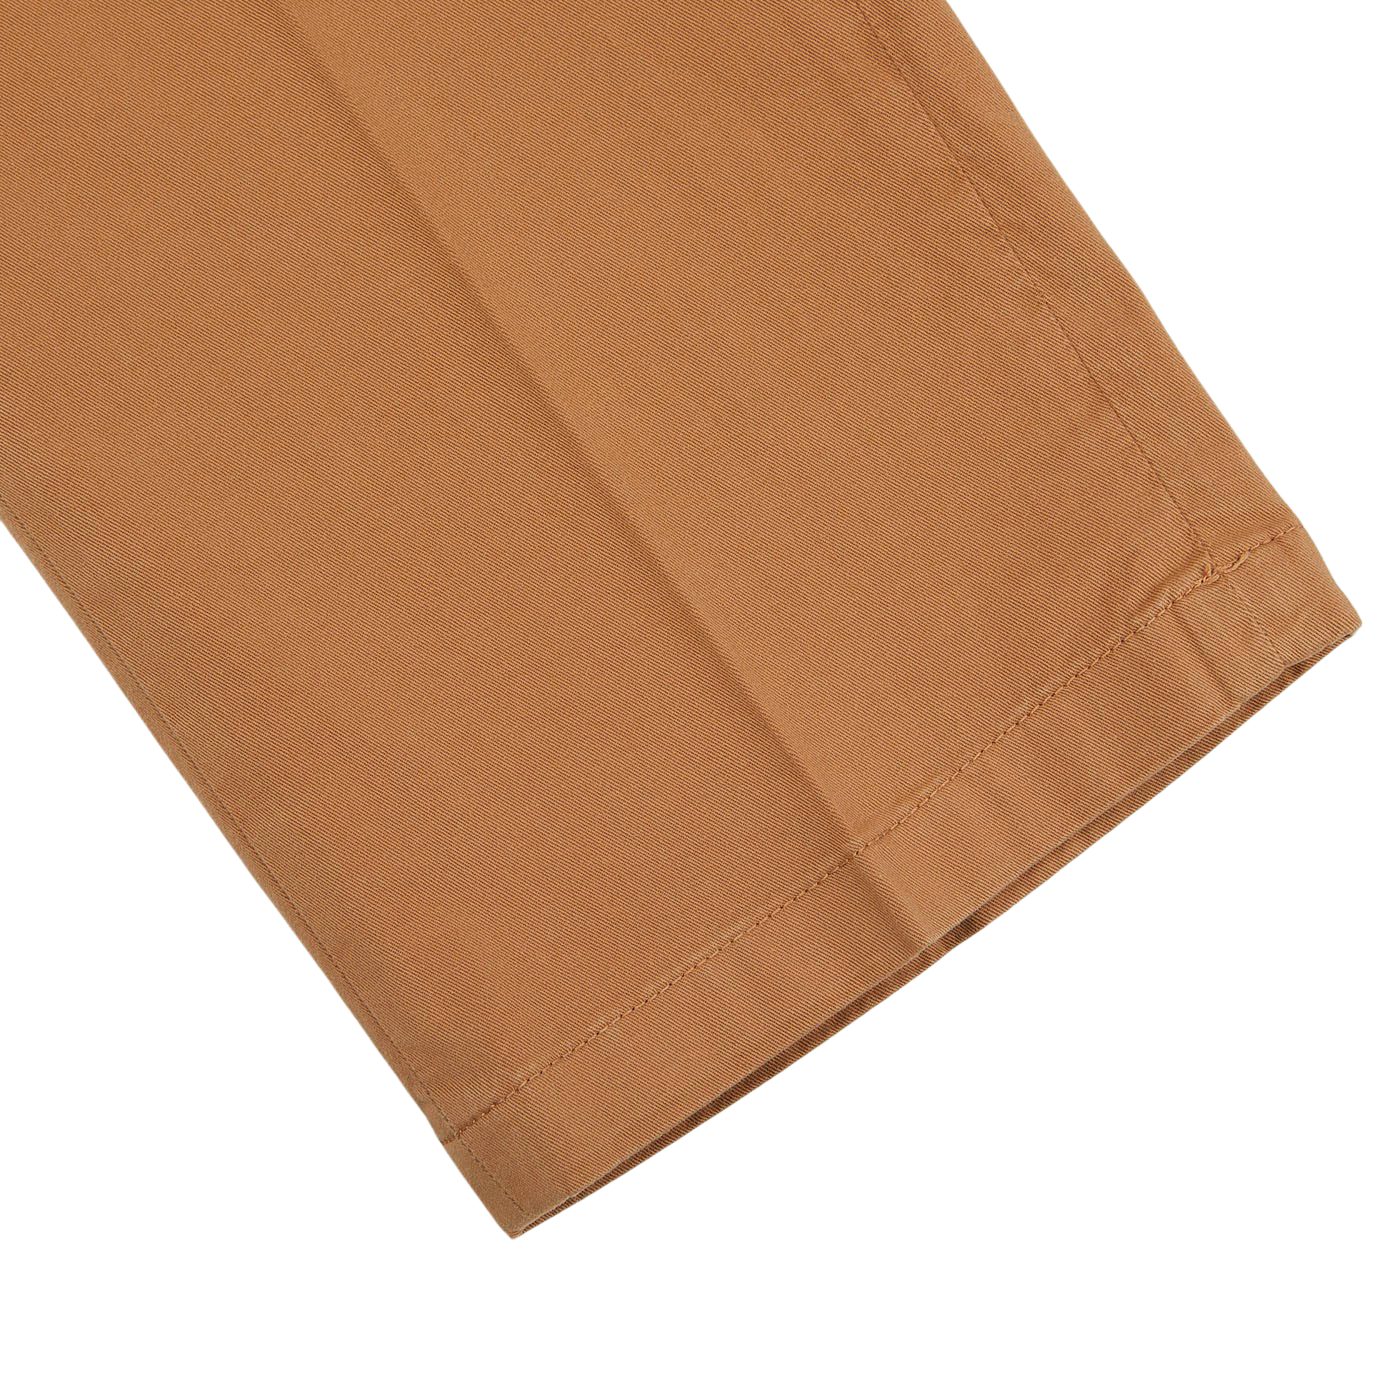 A pair of Canali Terracotta Cotton Stretch Flat Front Chinos on a white background.